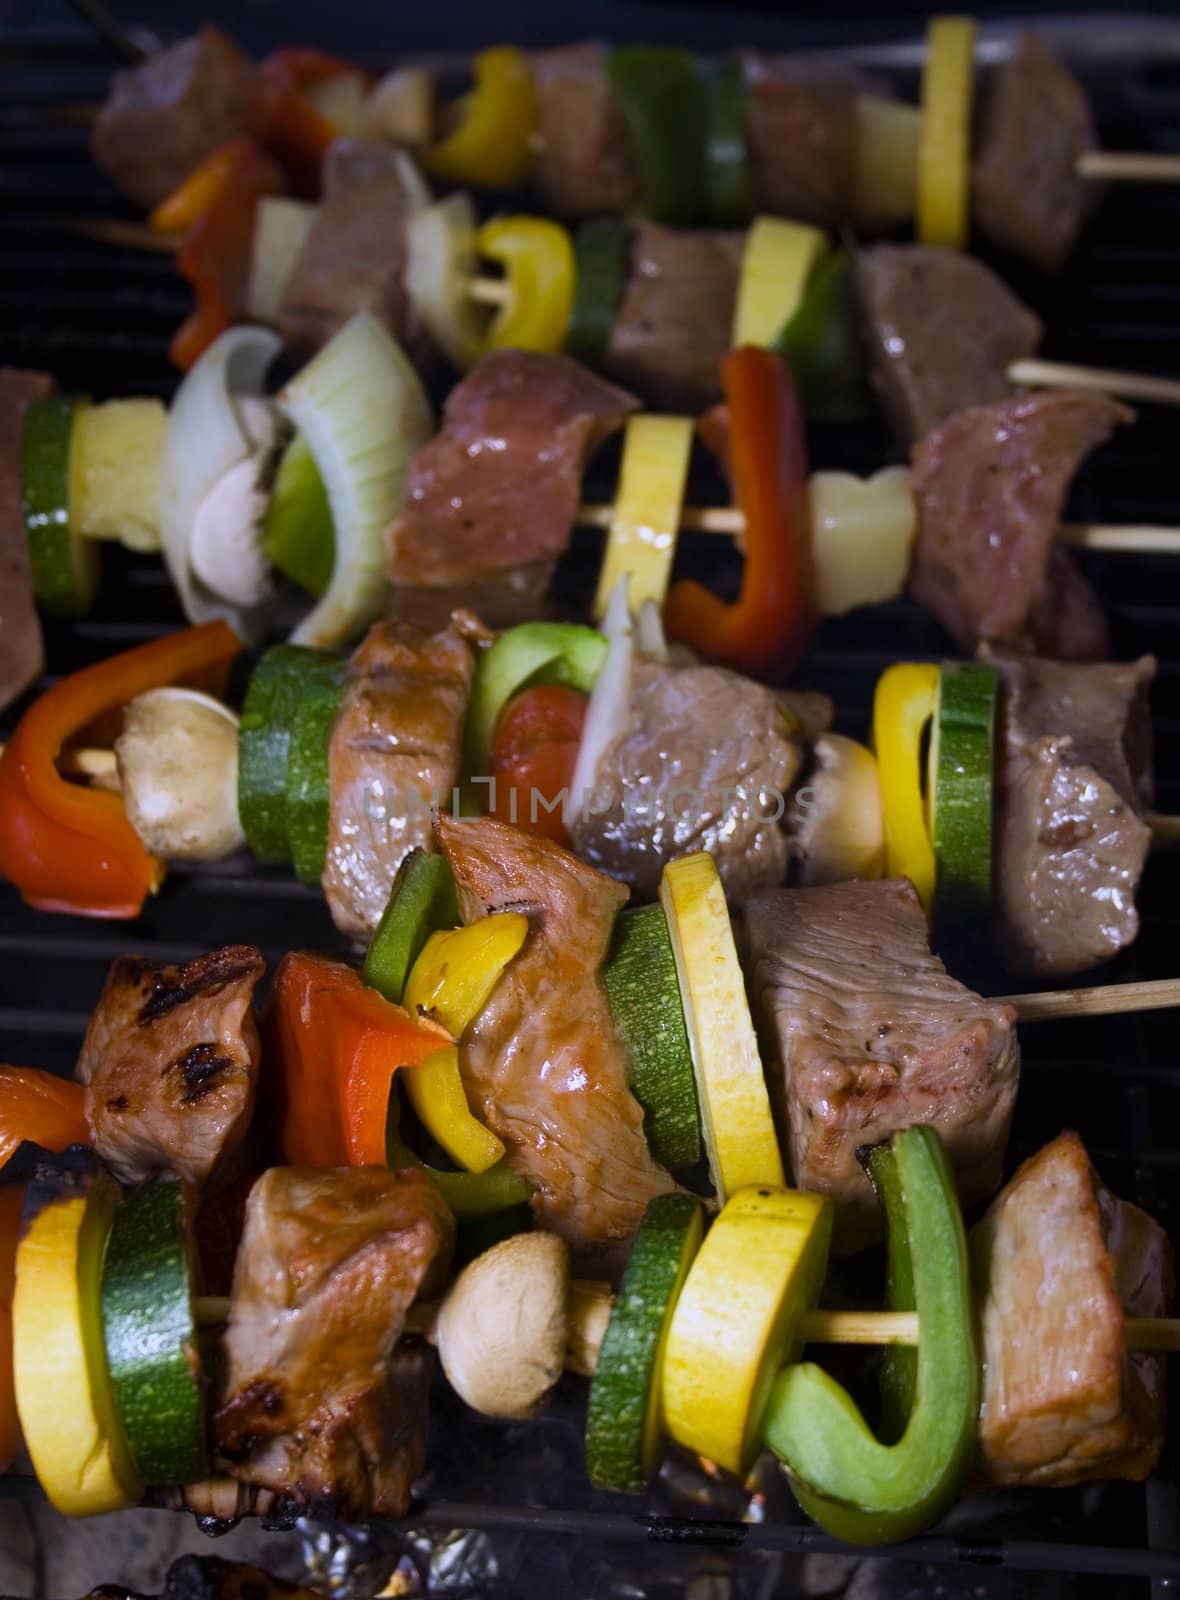 Shishkabobs on a grill